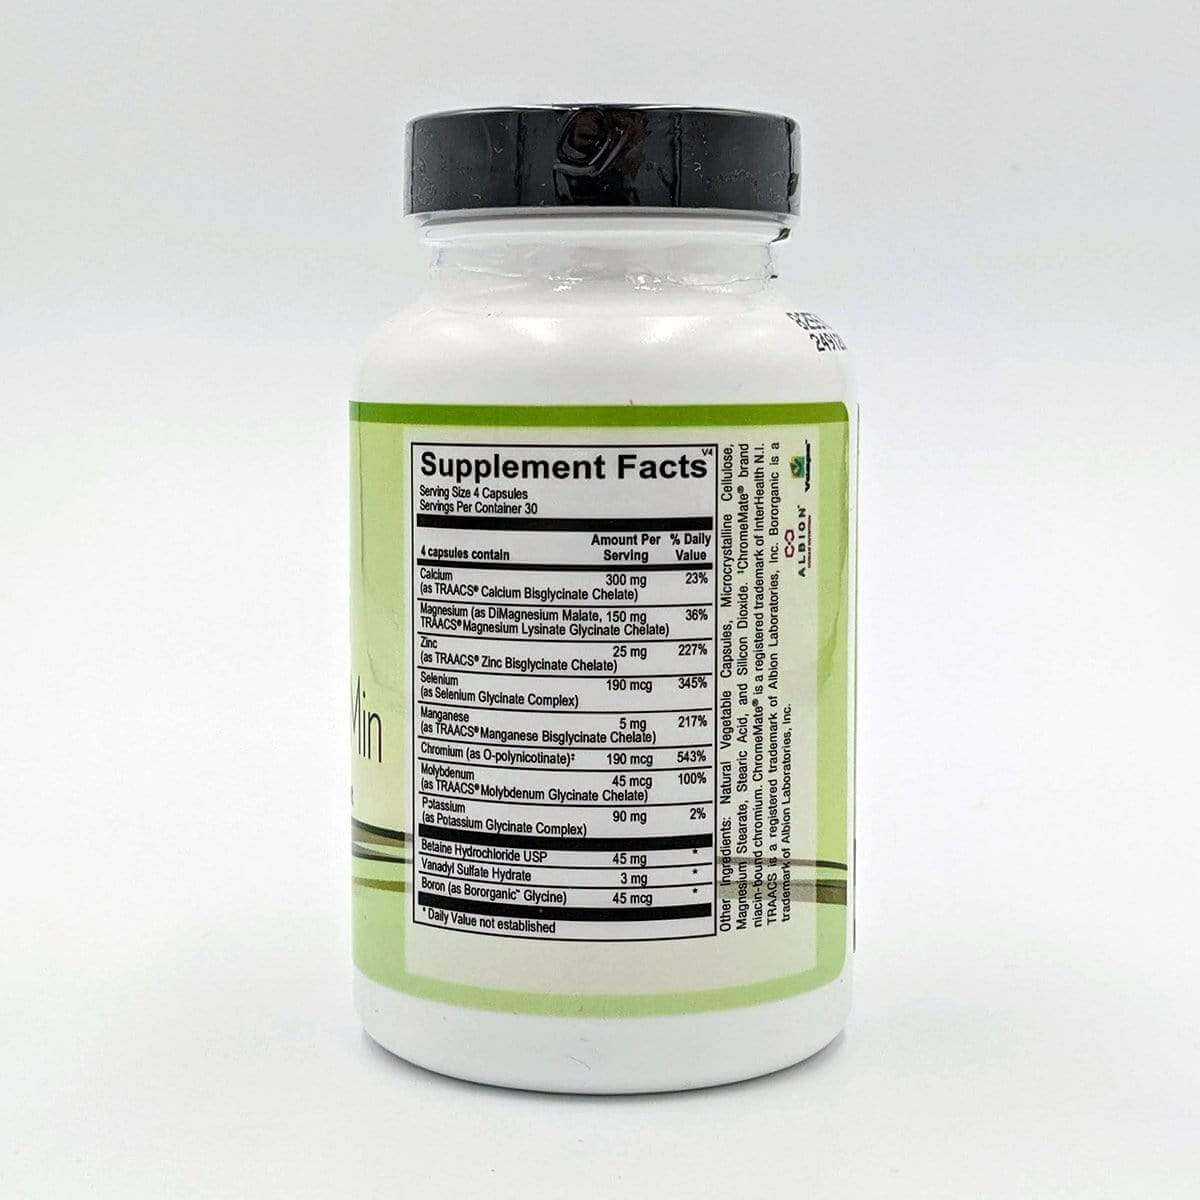 Clear Multi Min - 120 Count Conners Clinic Supplement - Conners Clinic